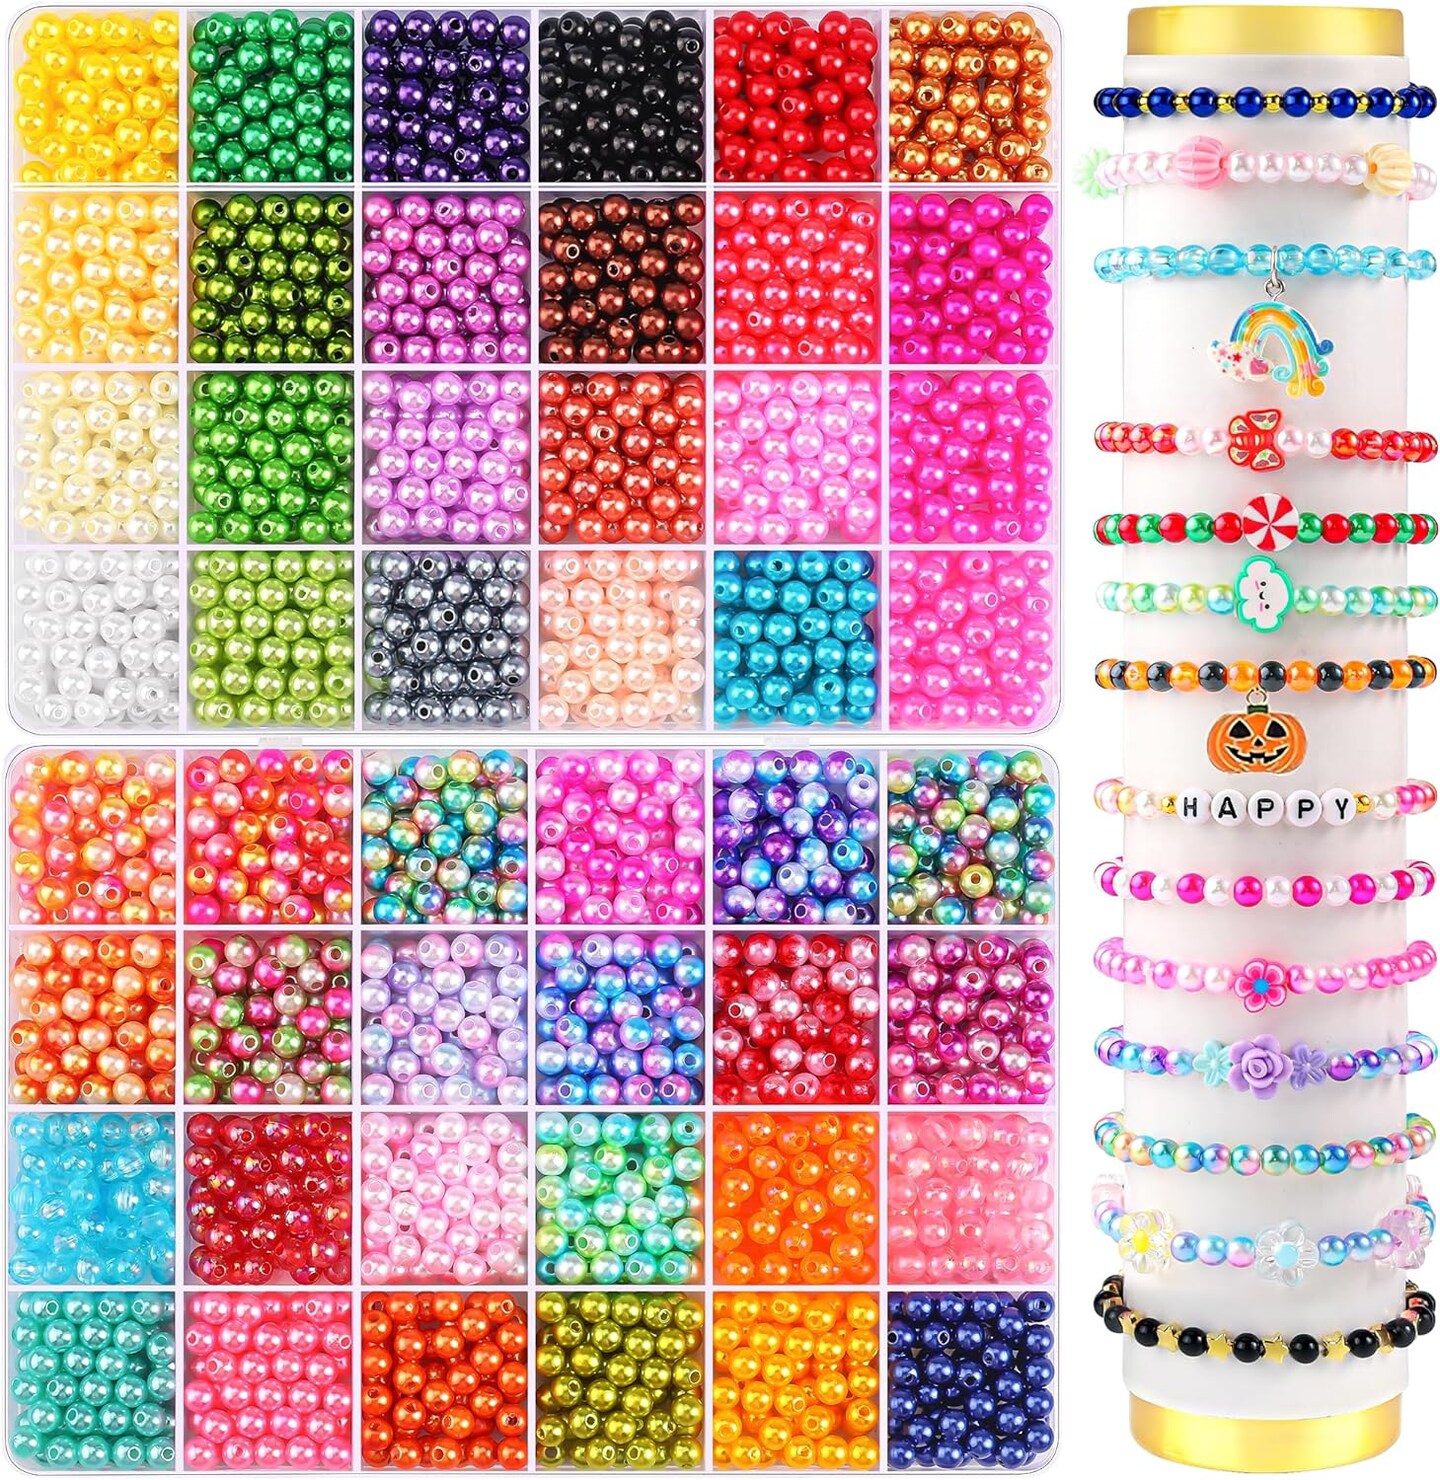 Pearl Beads for Jewelry Making 48 Colorful 6mm Round Pearl Beads for Bracelets Making Kit Small Pearl Filler Beads for DIY Craft Necklace Earrings